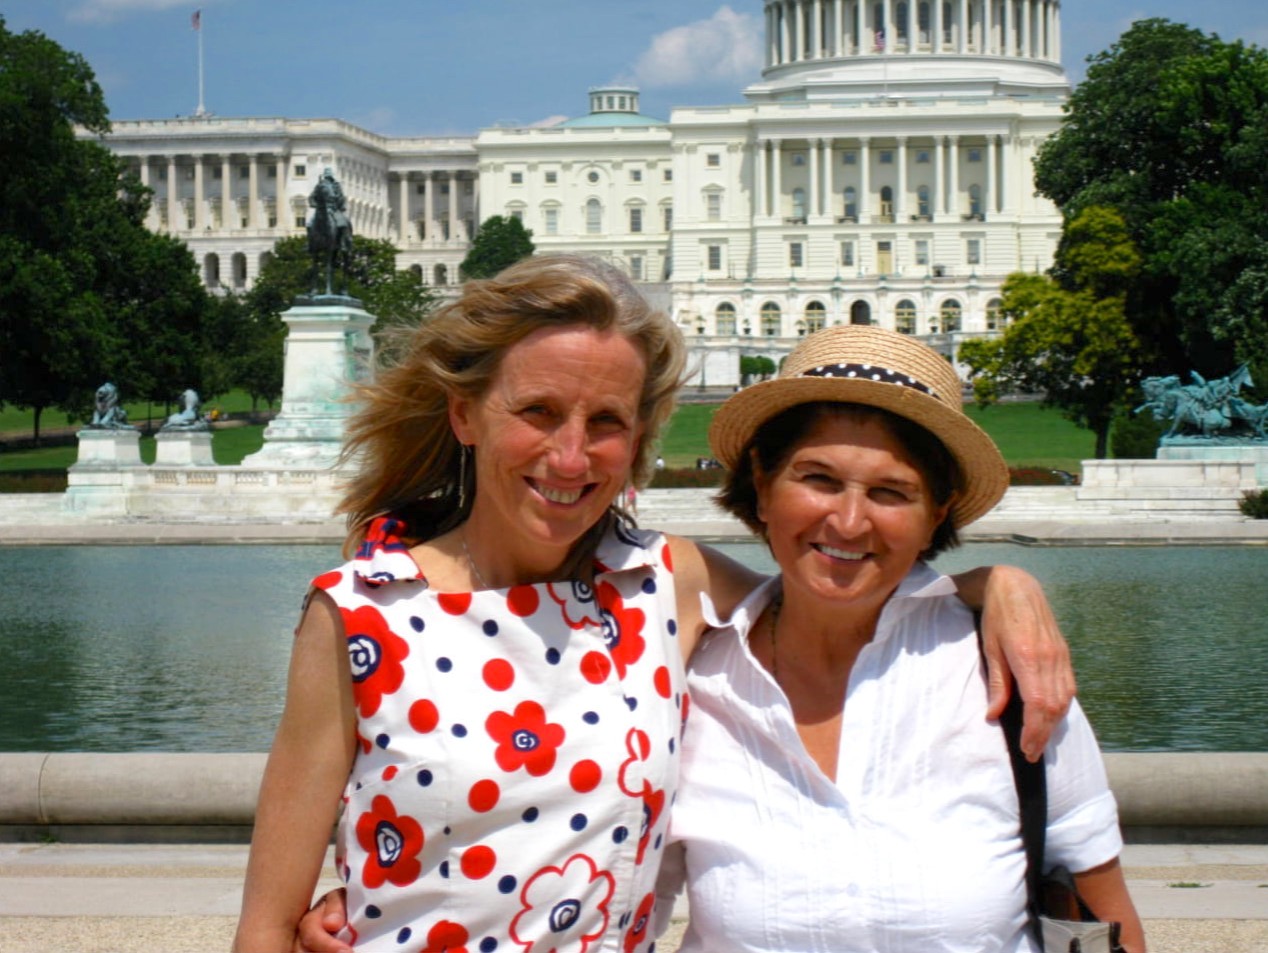 Mary O’Connor and Michela Griffo on their first real date, Washington, DC, 2010. Photo courtesy of Michela Griffo.